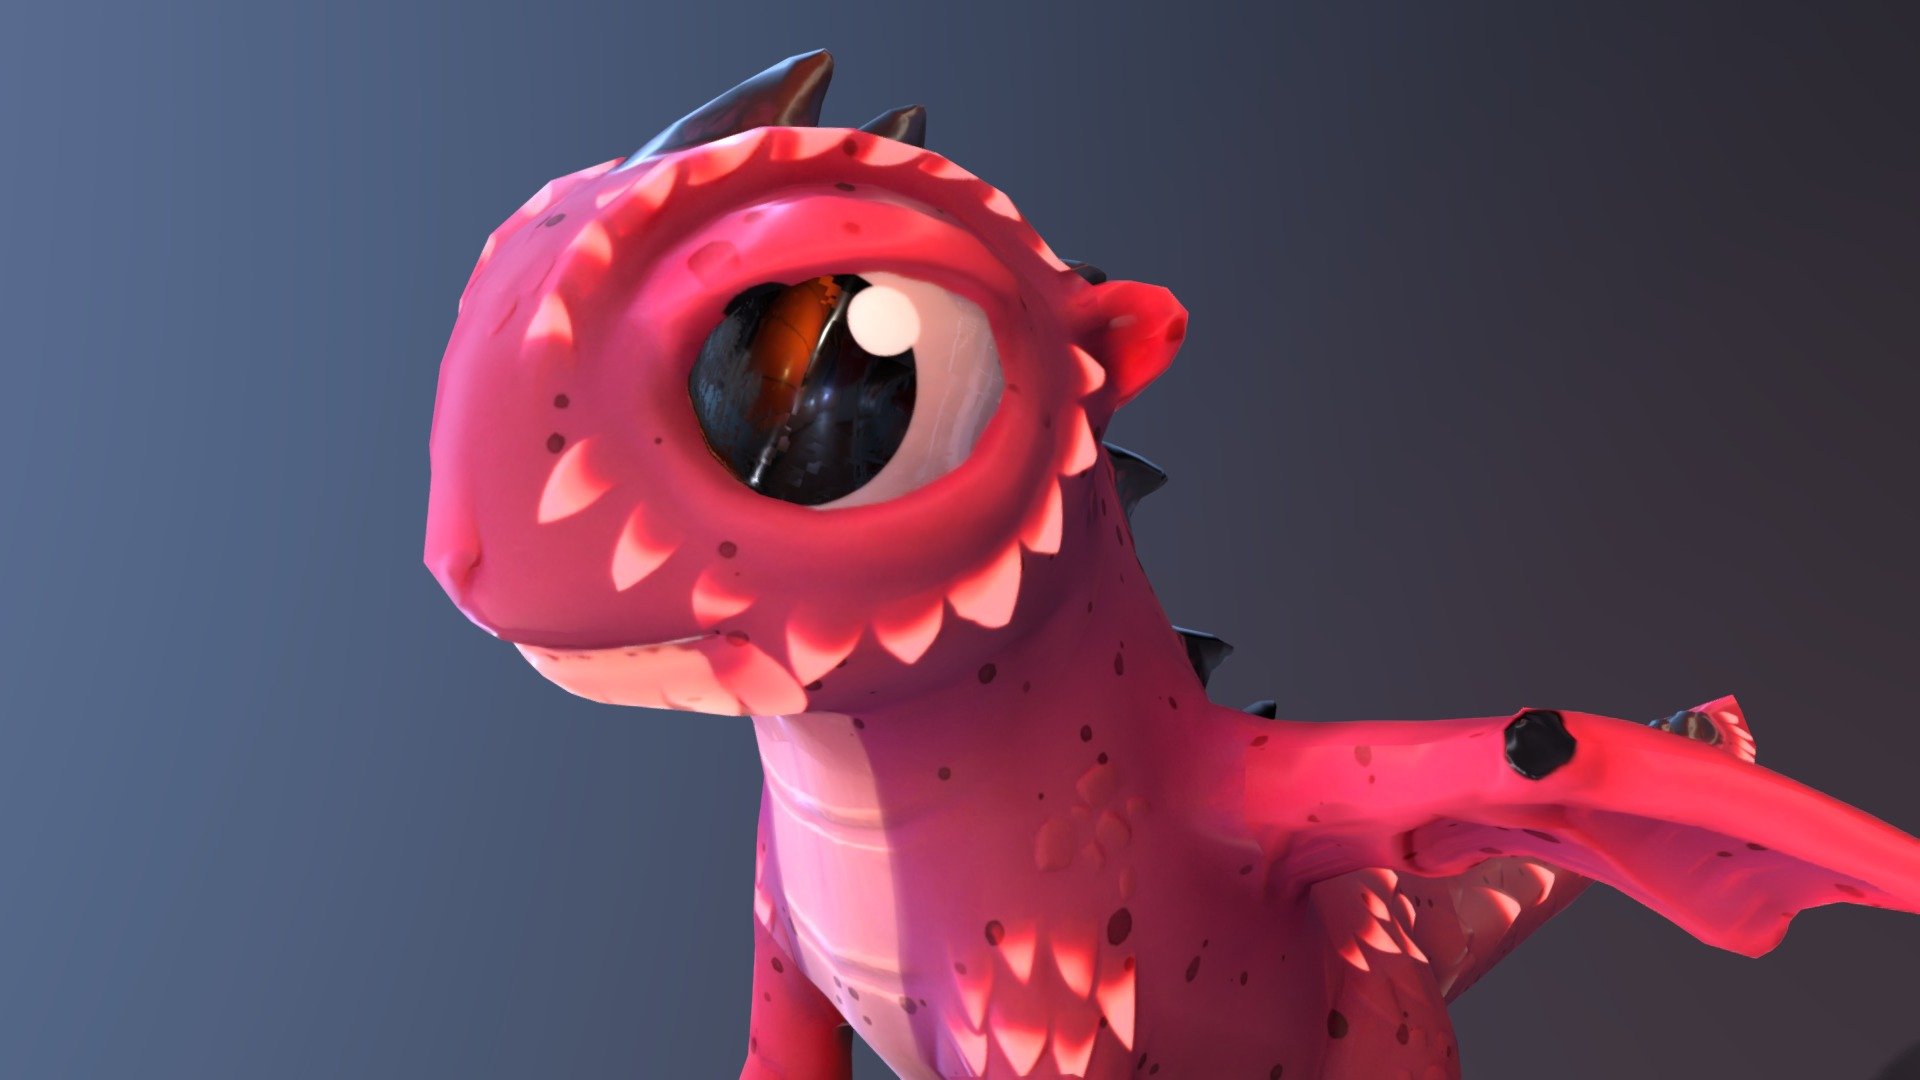 Dwarf Dragon
Unity Pacakge
Unity Version 2019.4.11f1
If you need Raw rigged maya file the please contack me

Tris:6070
Prefab:5
PBR Texture: 2048x2048 (x14).png
Complement- Irish Eye textures for all Dragon
Animations: 42 aprox
Your time and feedback is greatly appreciated and also help me continue
developing asset in this style 3d model